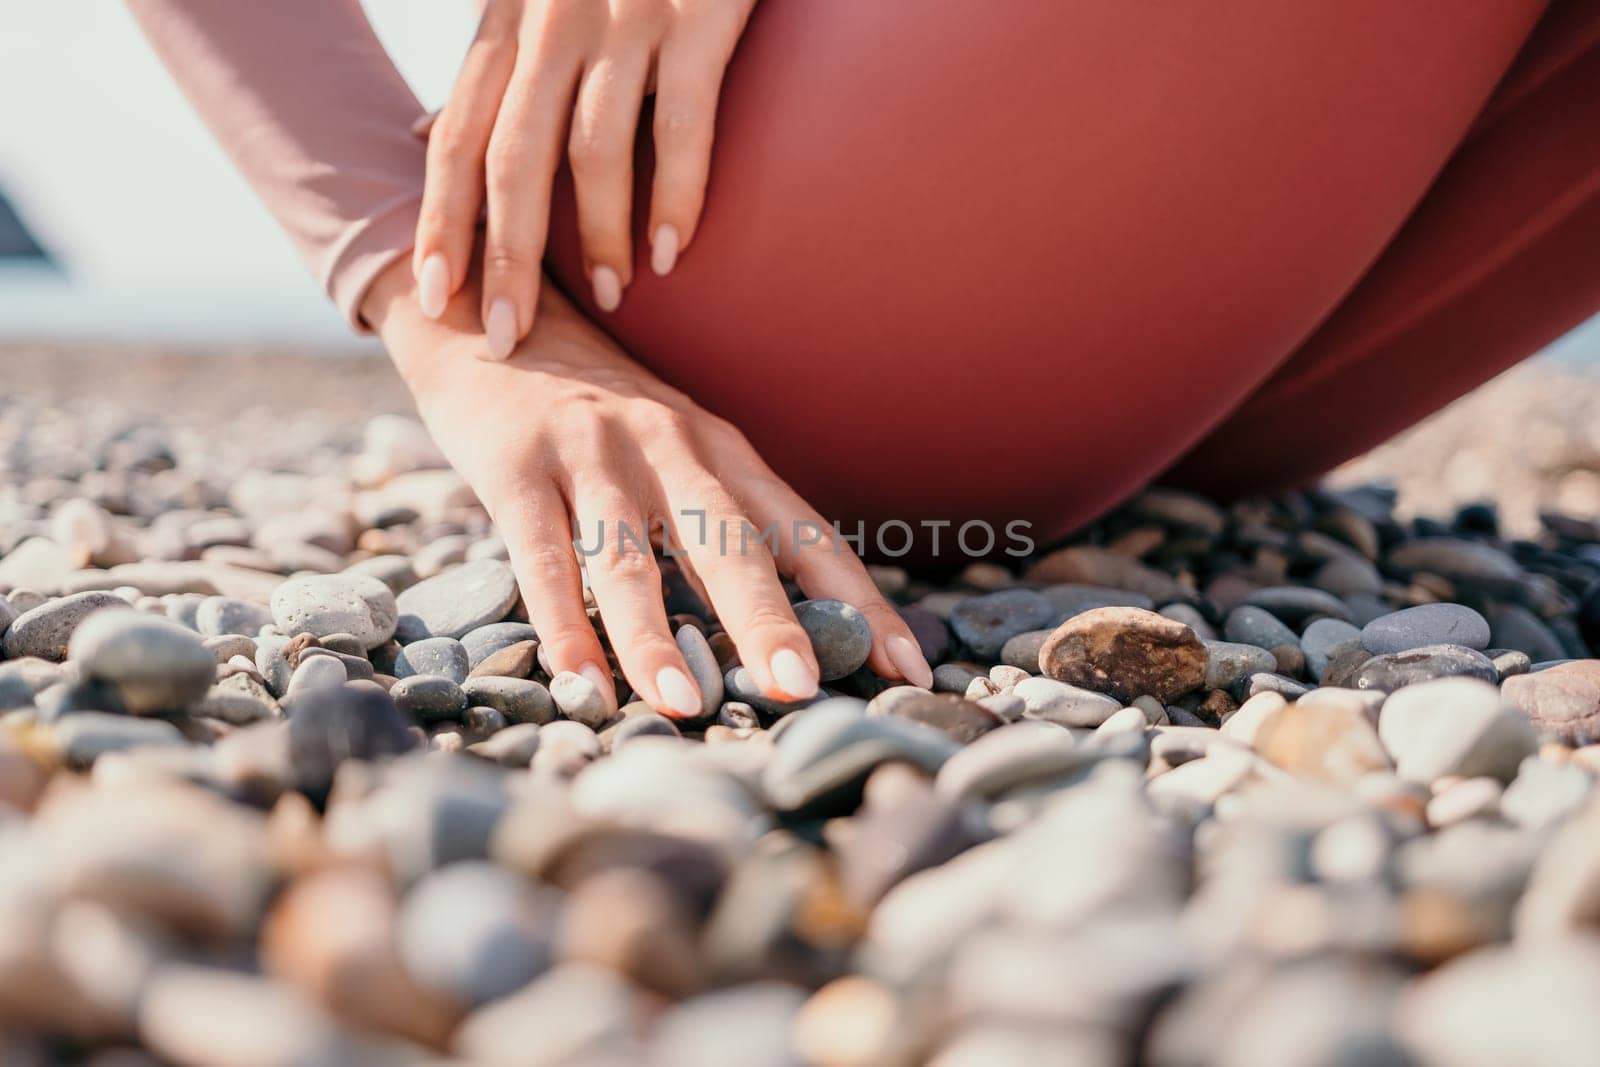 Young woman with long hair in white swimsuit and boho style braclets practicing outdoors on yoga mat by the sea on a sunset. Women's yoga fitness routine. Healthy lifestyle, harmony and meditation